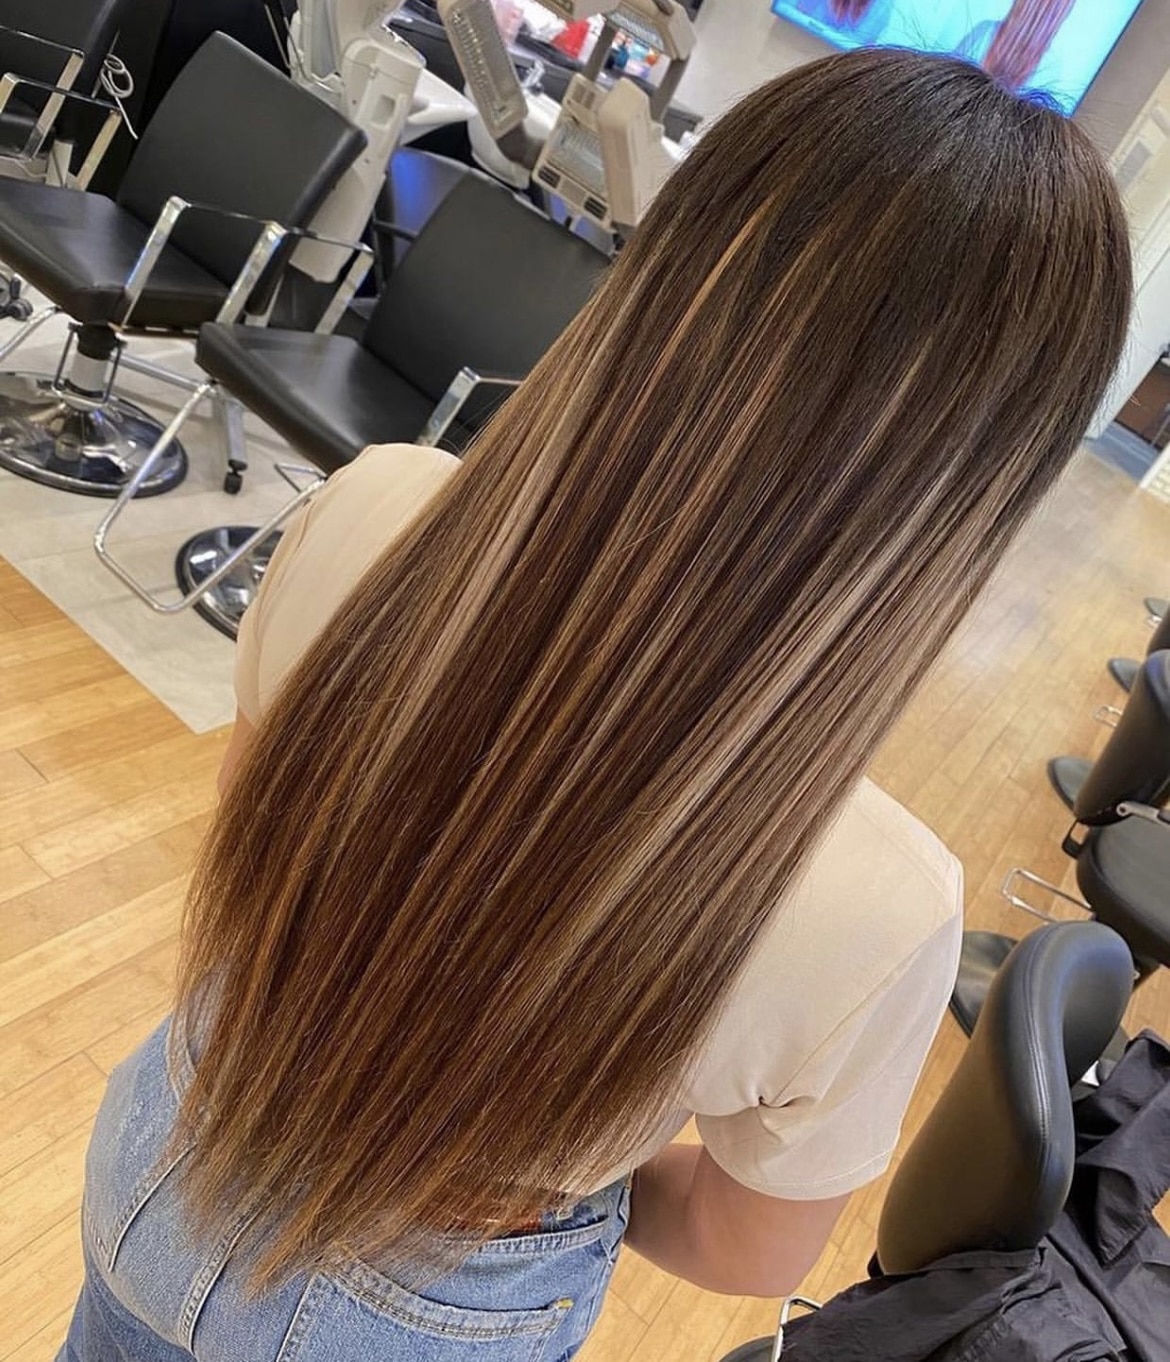 Summer Extensions - Get the Best Quality Hair Extensions